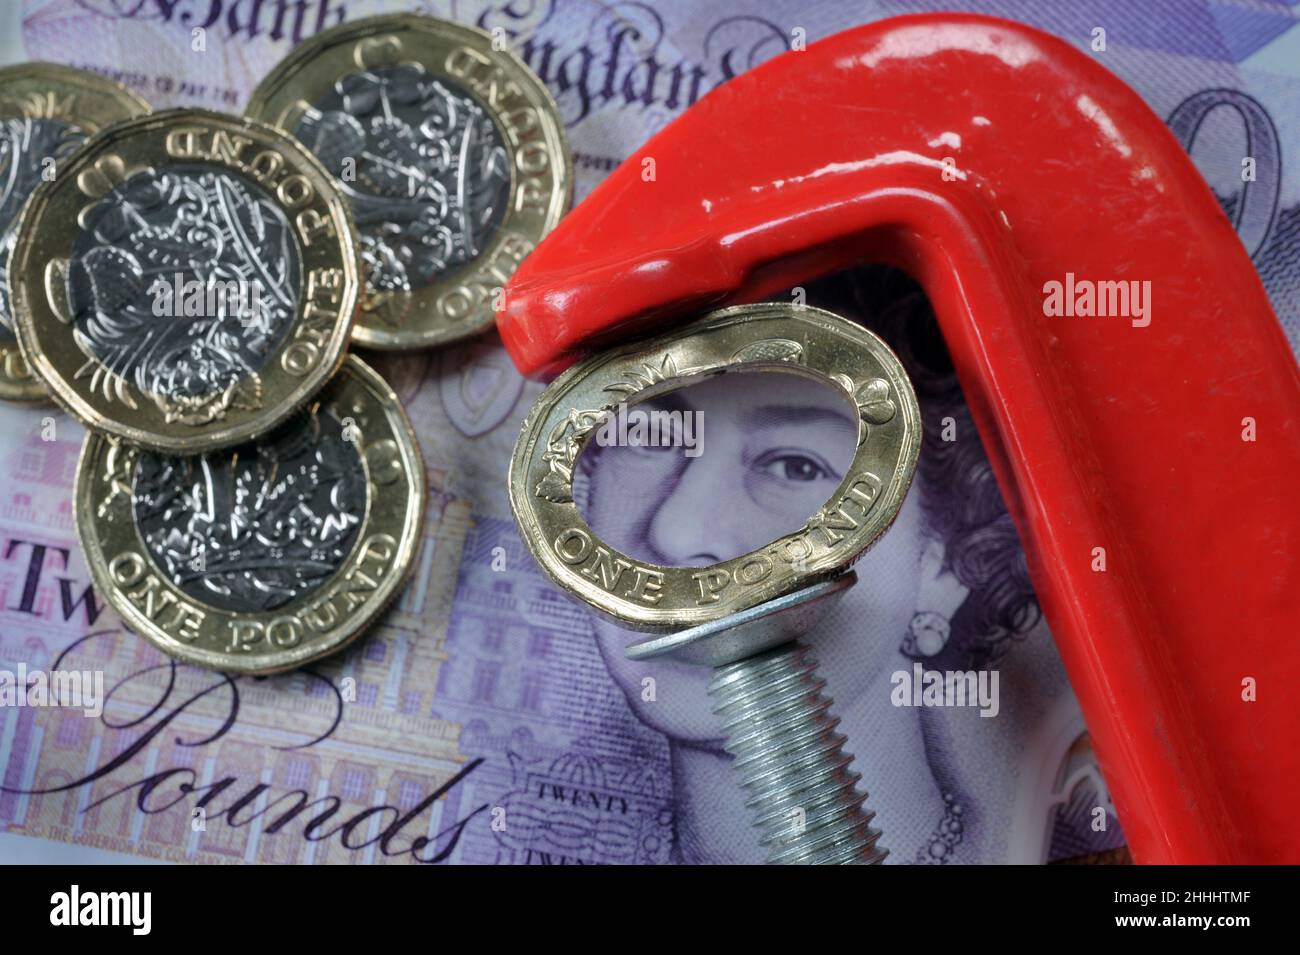 CRUSHED ONE POUND COIN IN JAWS OF A CLAMP RE THE ECONOMY COST OF LIVING WAGES INCOMES ETC UK Stock Photo